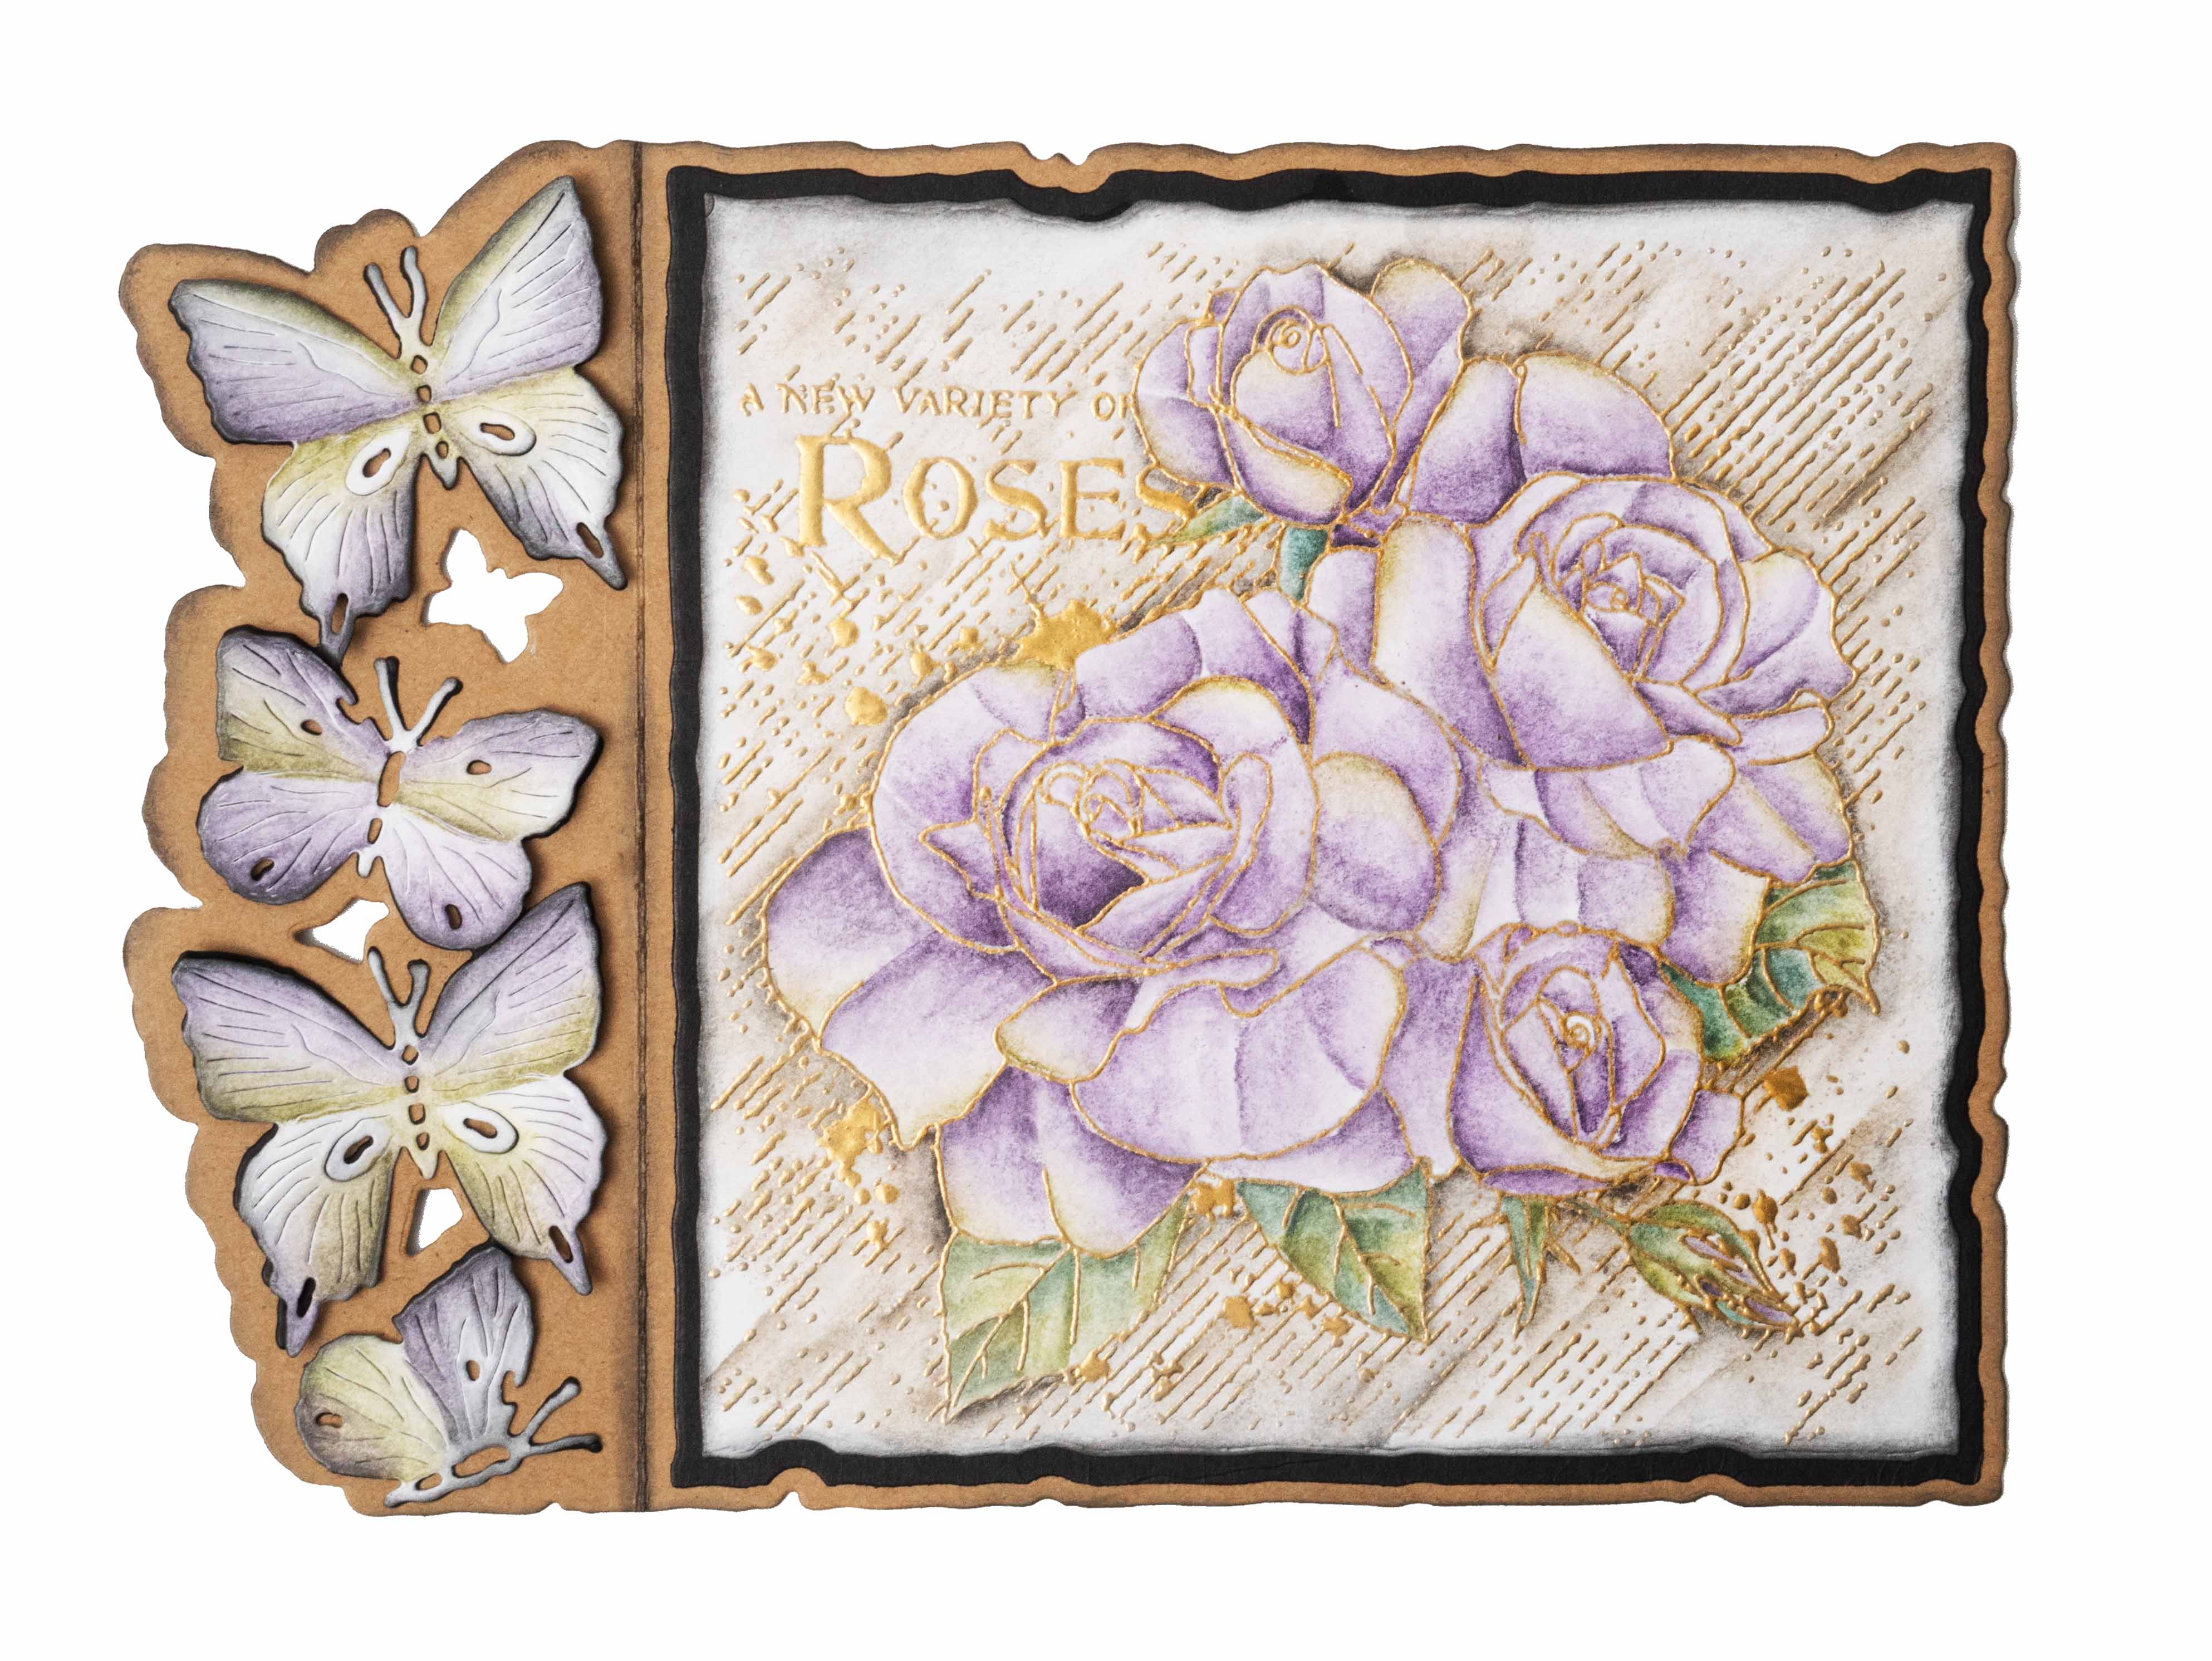 SL Clear Stamp Roses Grunge Collection 122x122x3mm 1 PC nr.401